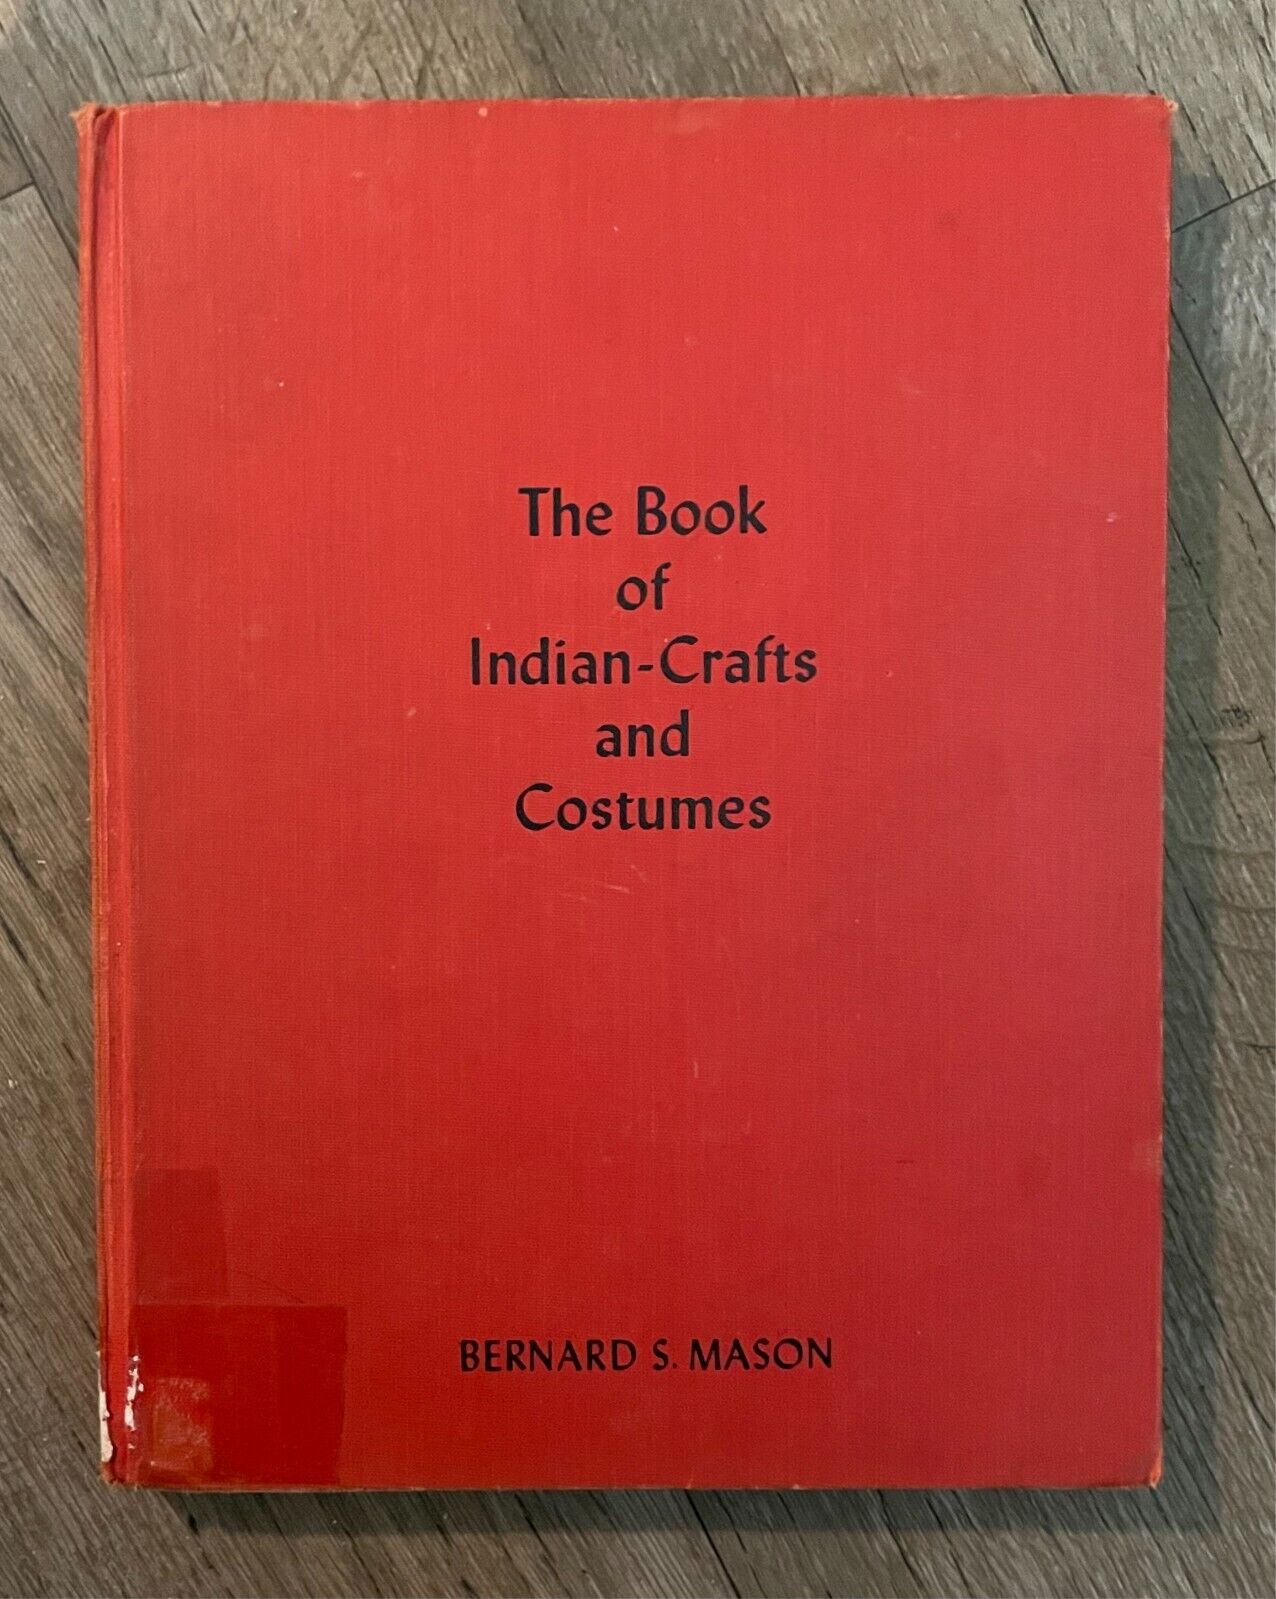 THE BOOK OF INDIAN-CRAFTS AND COSTUMES-FIRST EDITION-HARDBACK-'46-CLASSIC